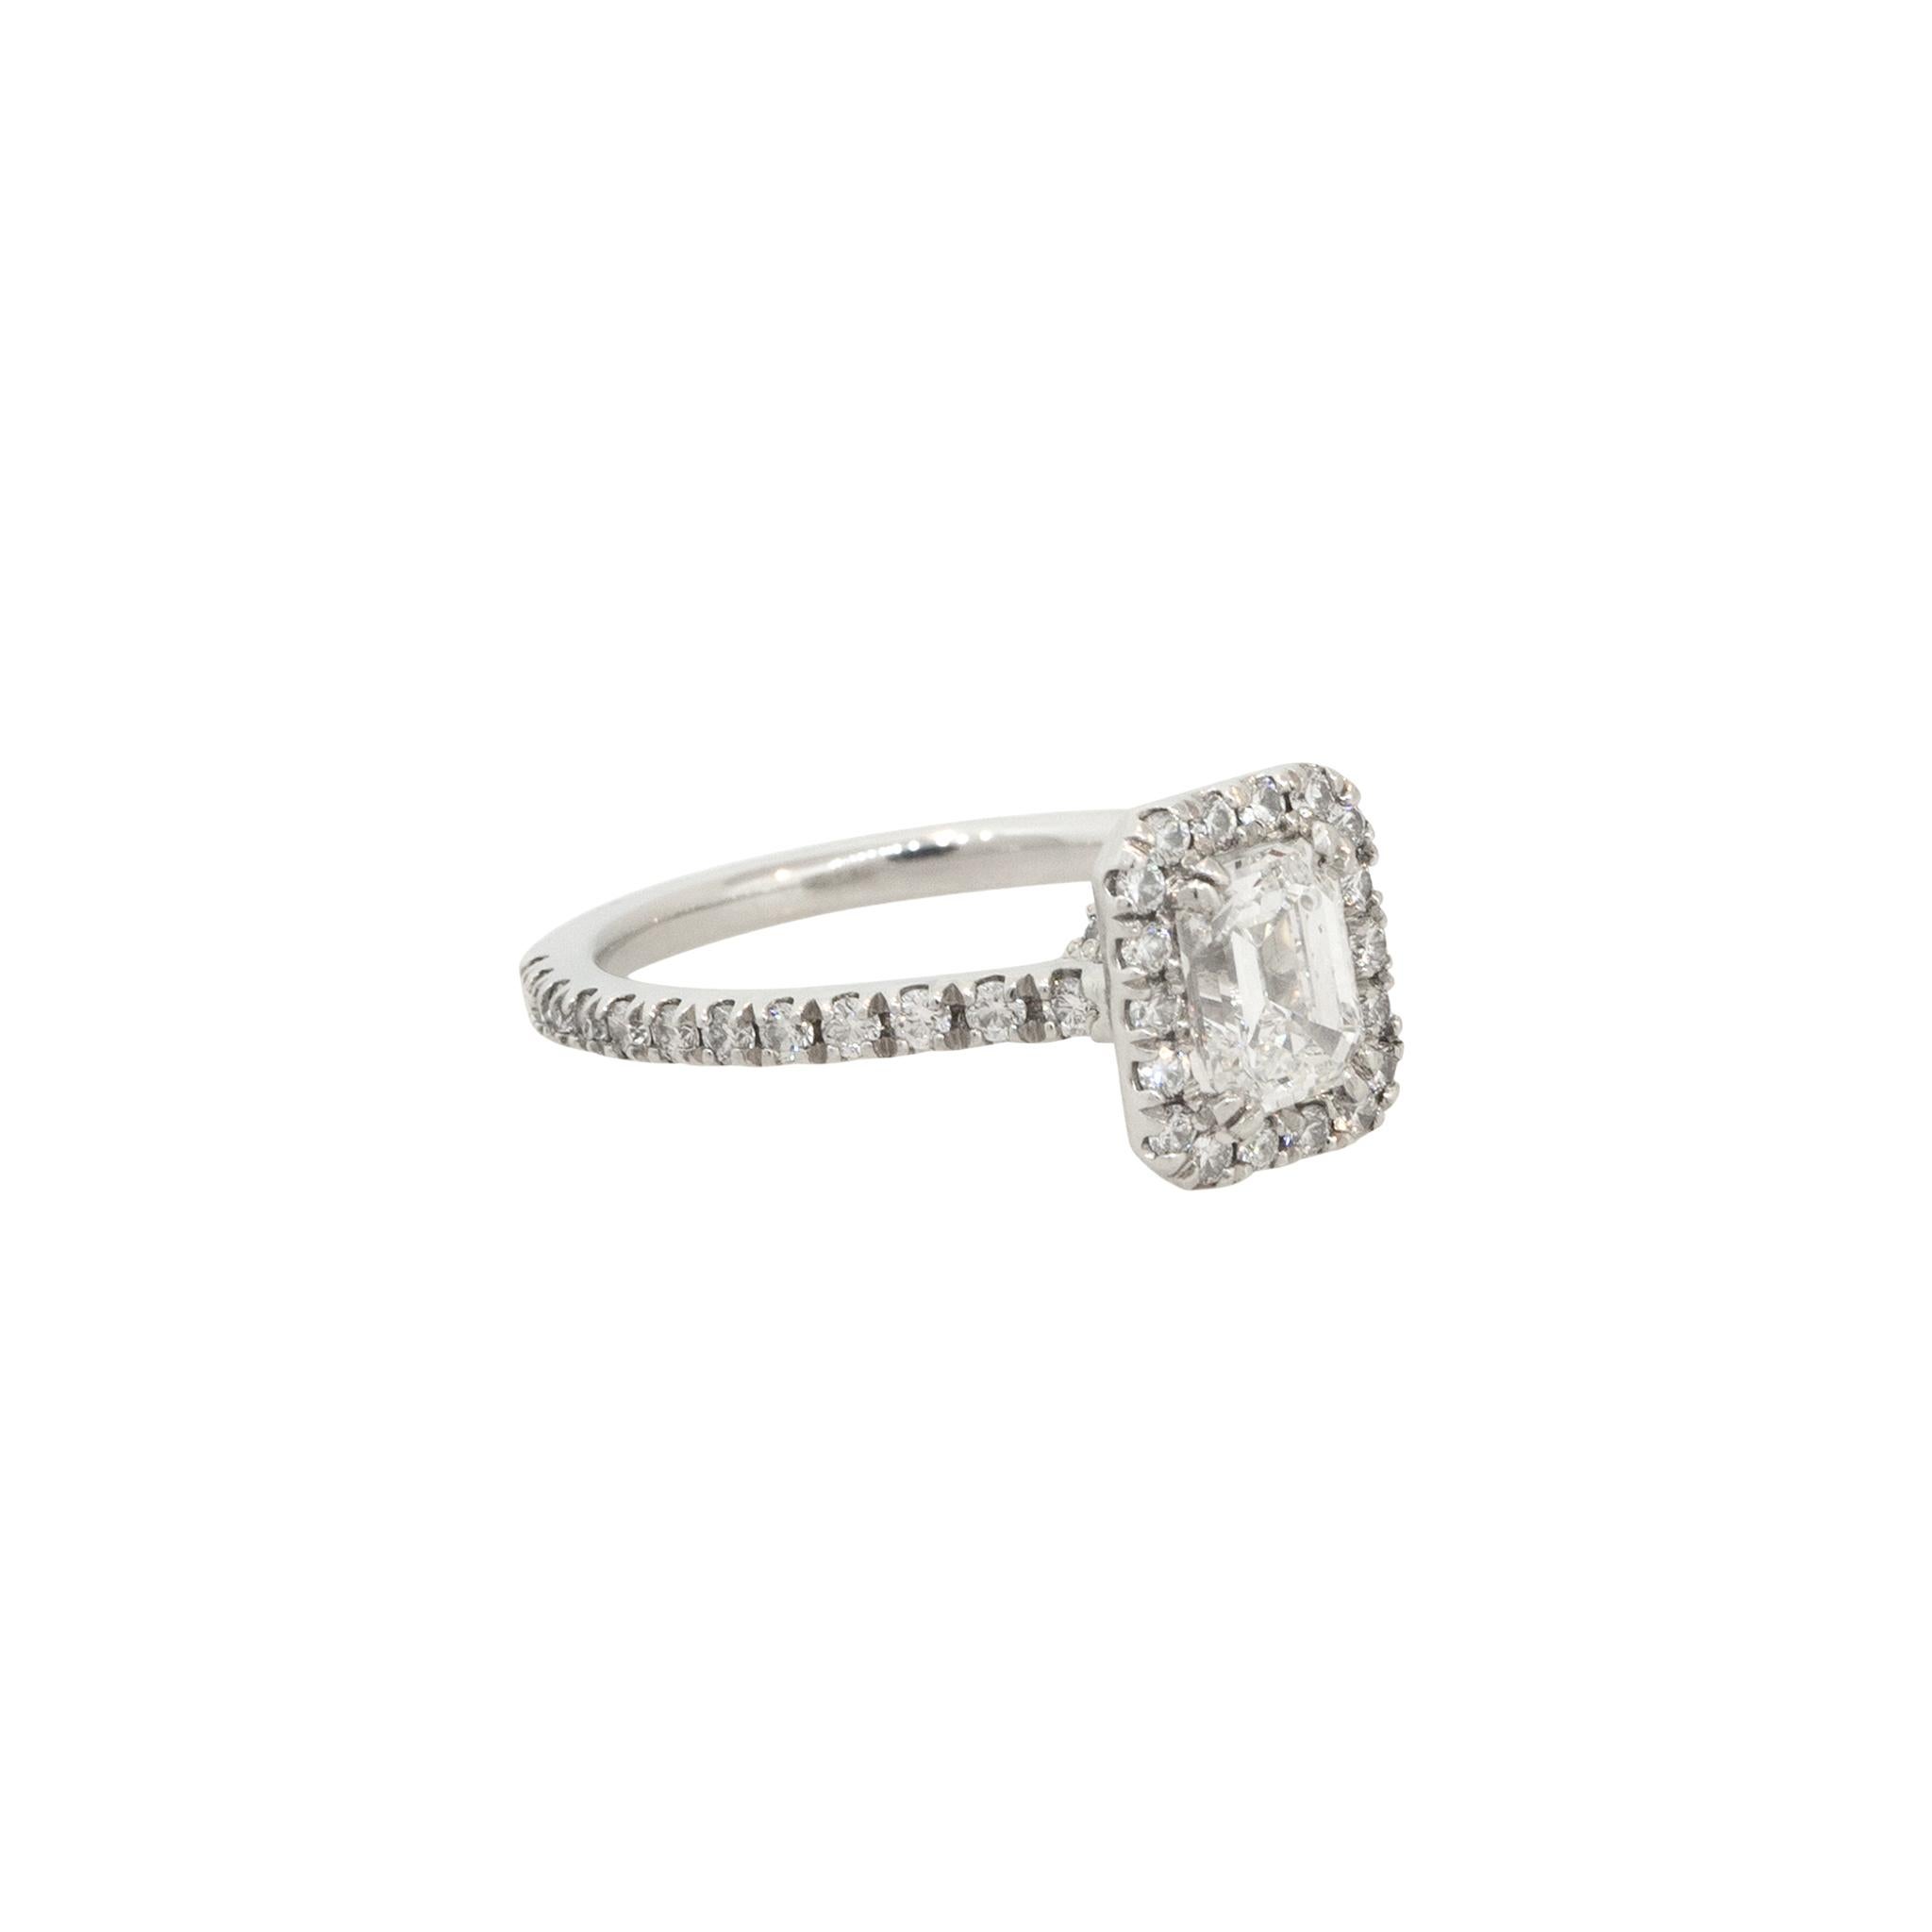 GIA Certified 1.58 Carat Emerald Cut Diamond Engagement Ring Platinum In Stock In Excellent Condition For Sale In Boca Raton, FL